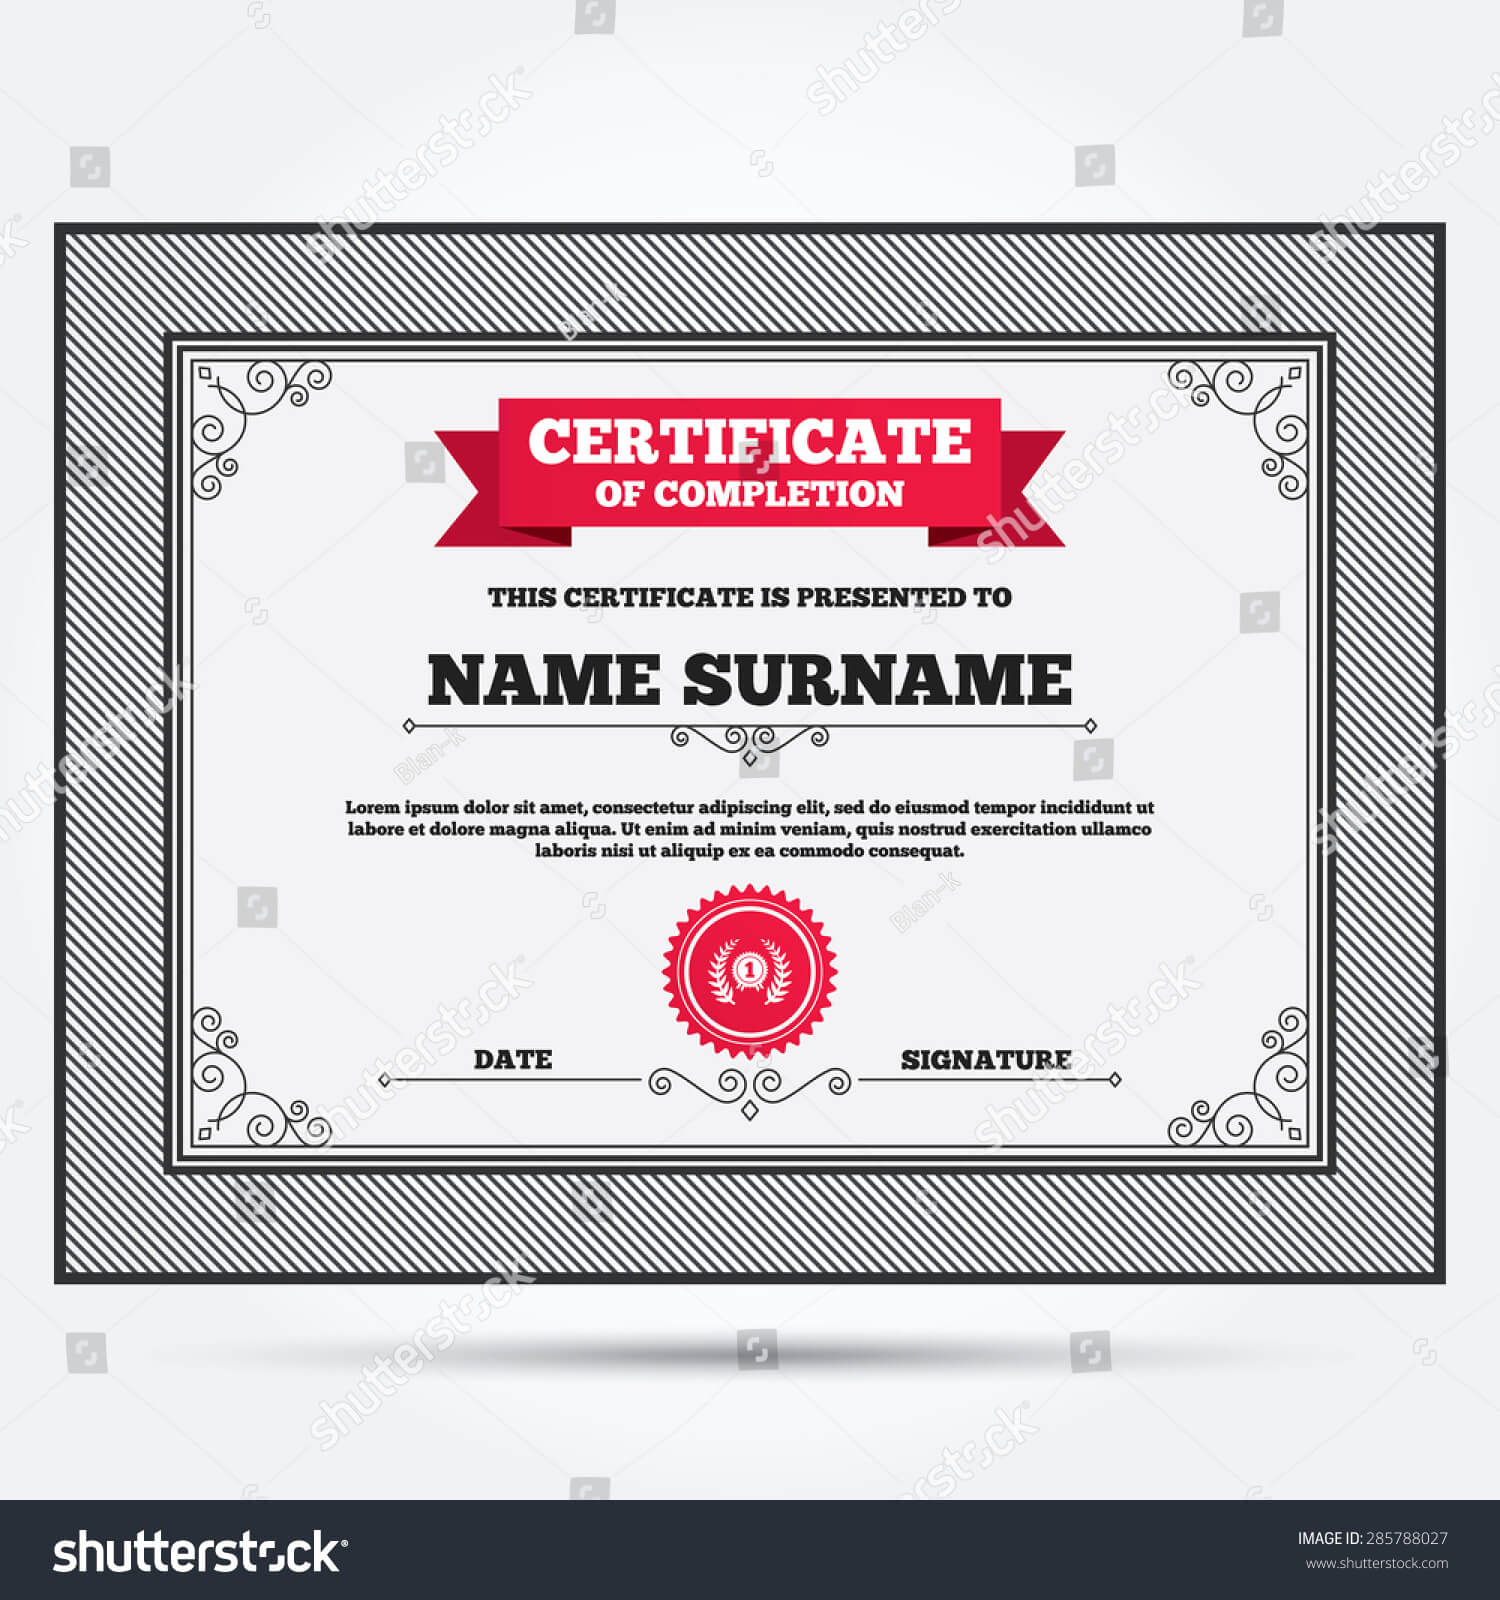 Certificate Completion First Place Award Sign Stock Vector Throughout First Place Award Certificate Template